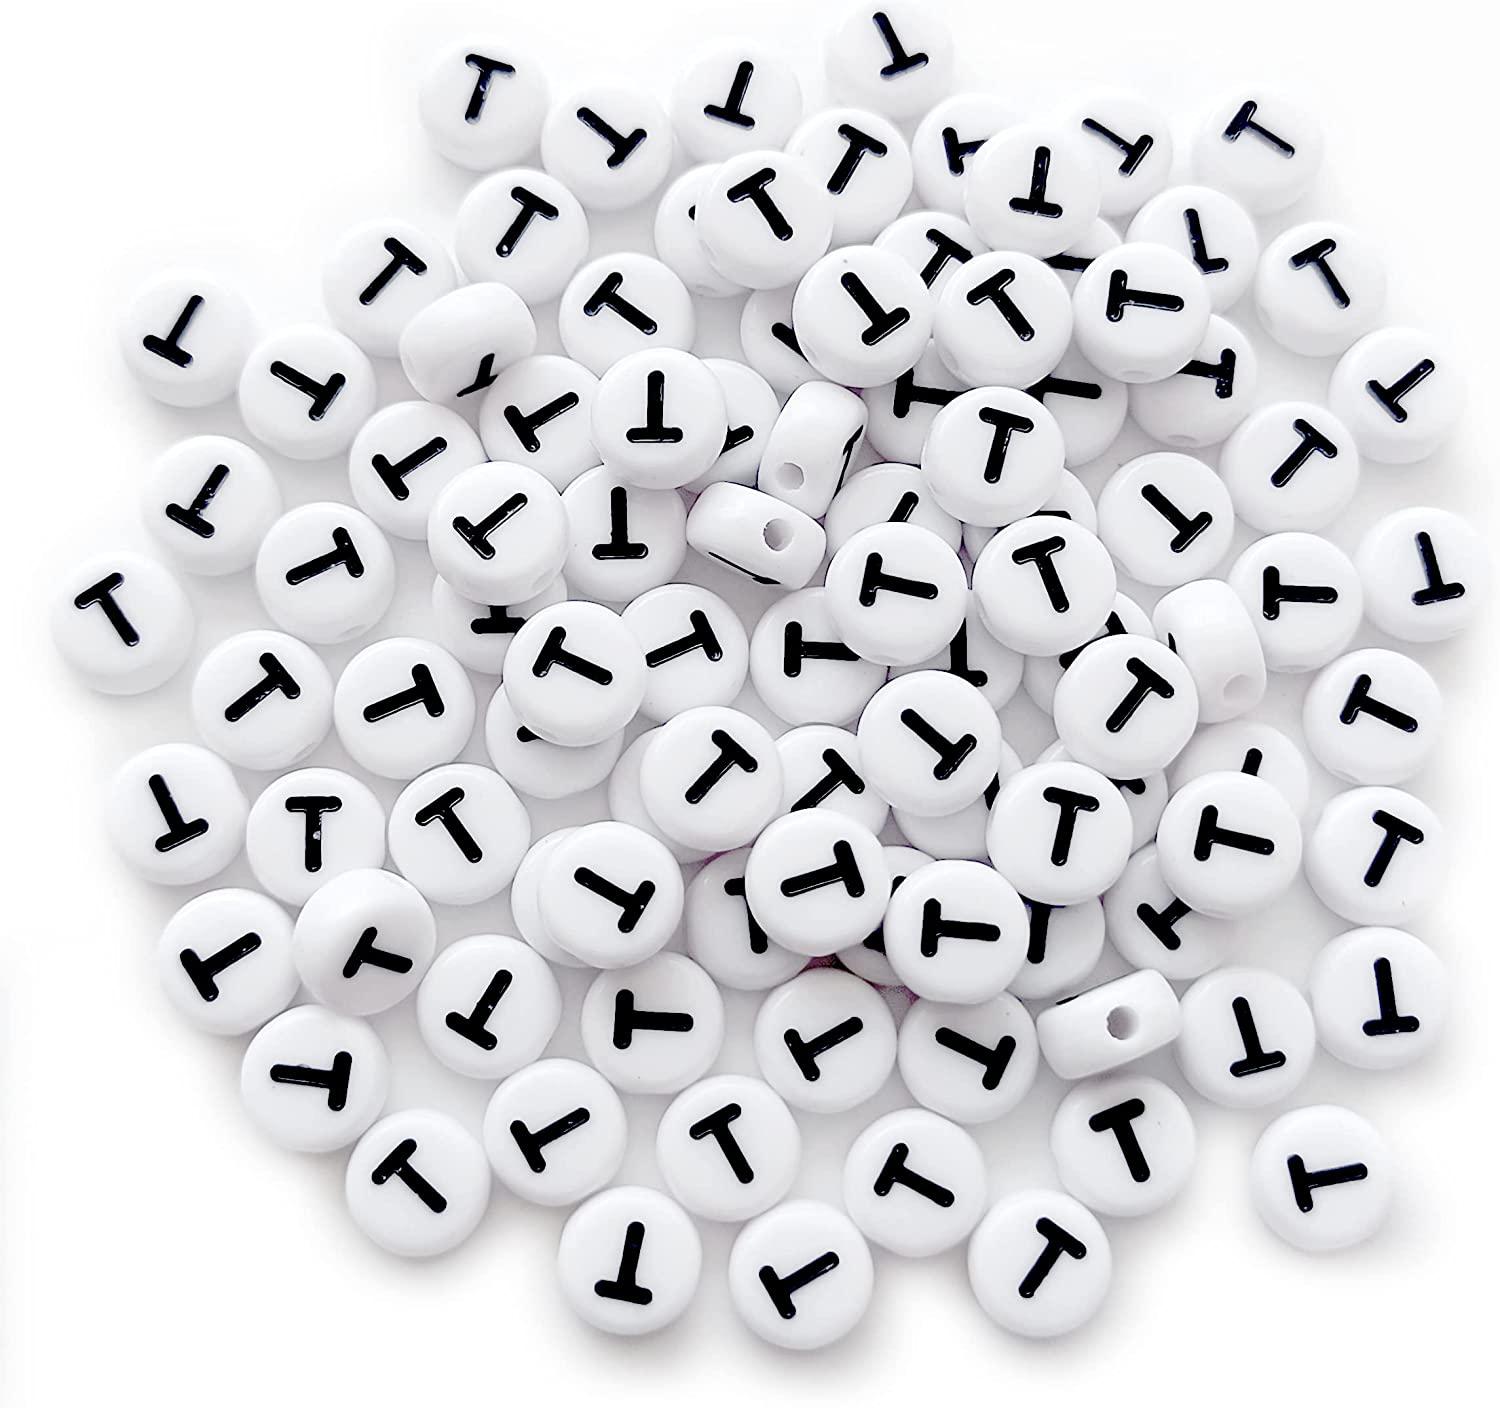 Bxwoum 100PCS Number Beads 4x7mm Acrylic Number Beads White Round Number 3  Beads for Jewelry Making DIY Bracelets Necklaces Key Chains(Number